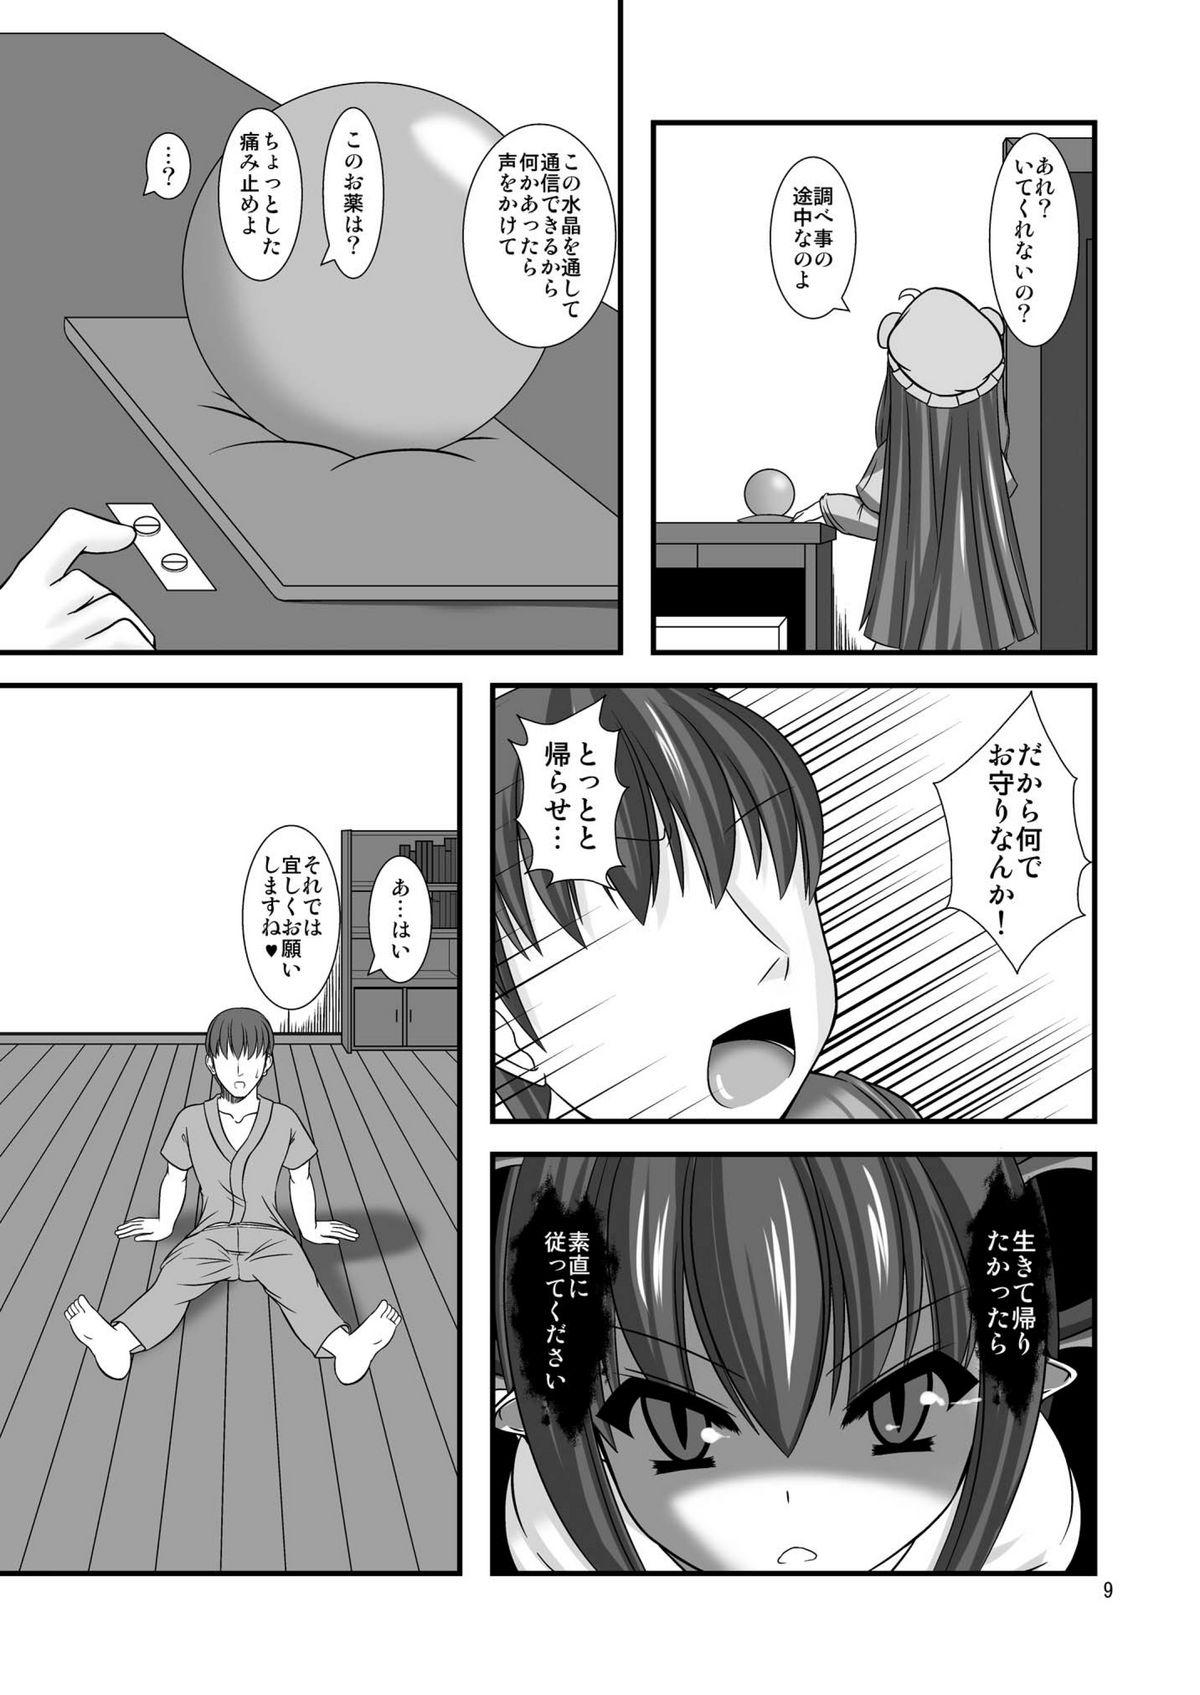 Wives Touhou do-M Hoihoi - Touhou project Groping - Page 9